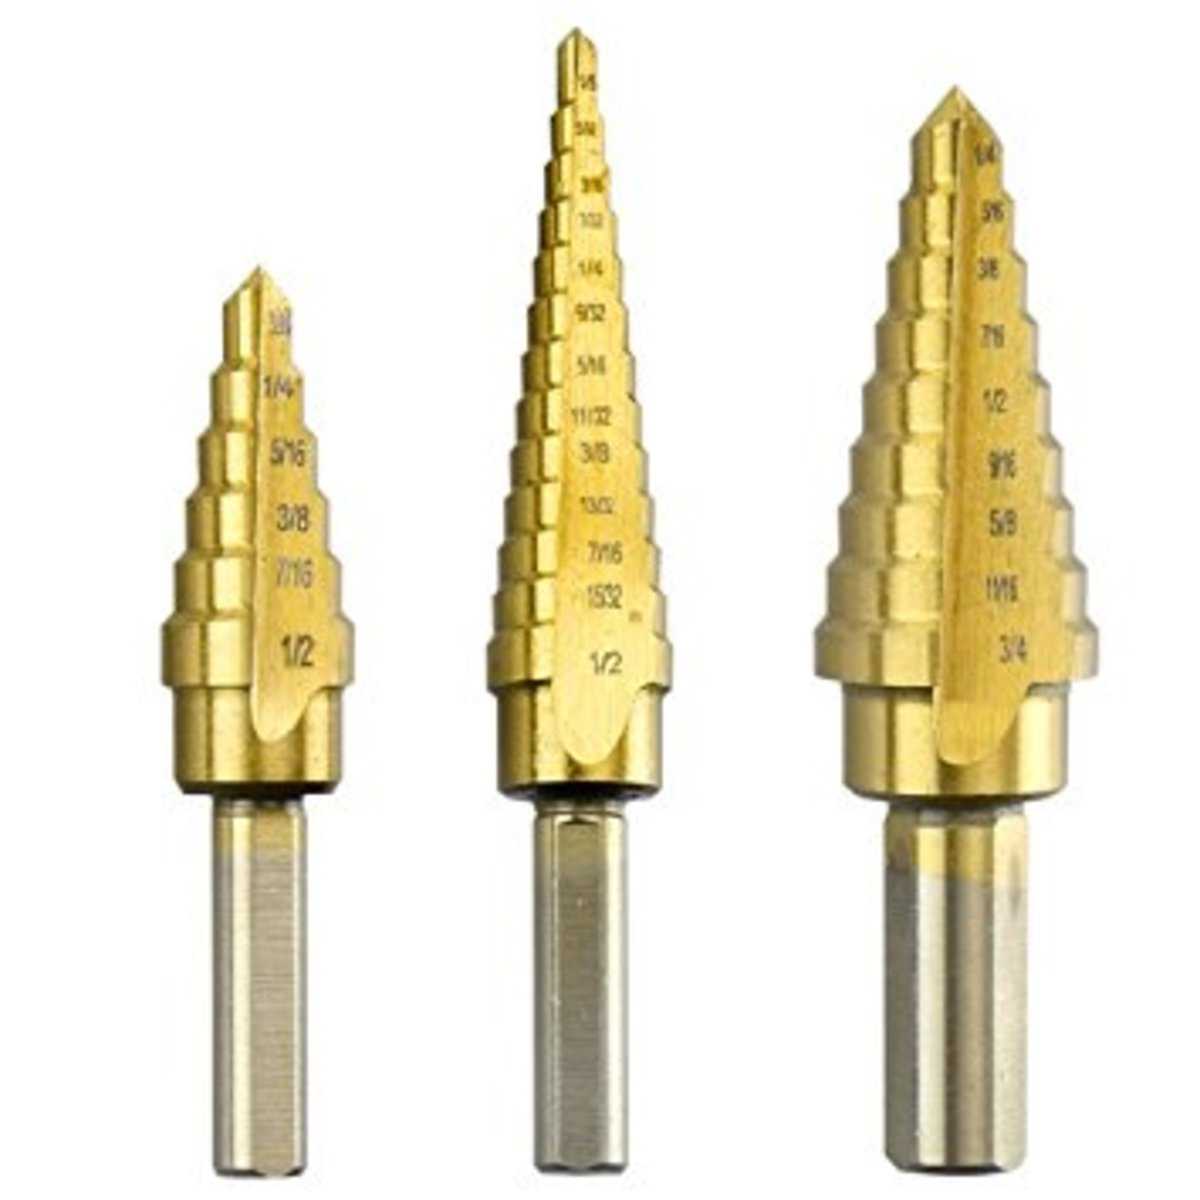 Safety Precautions when Using Step Drill Bits